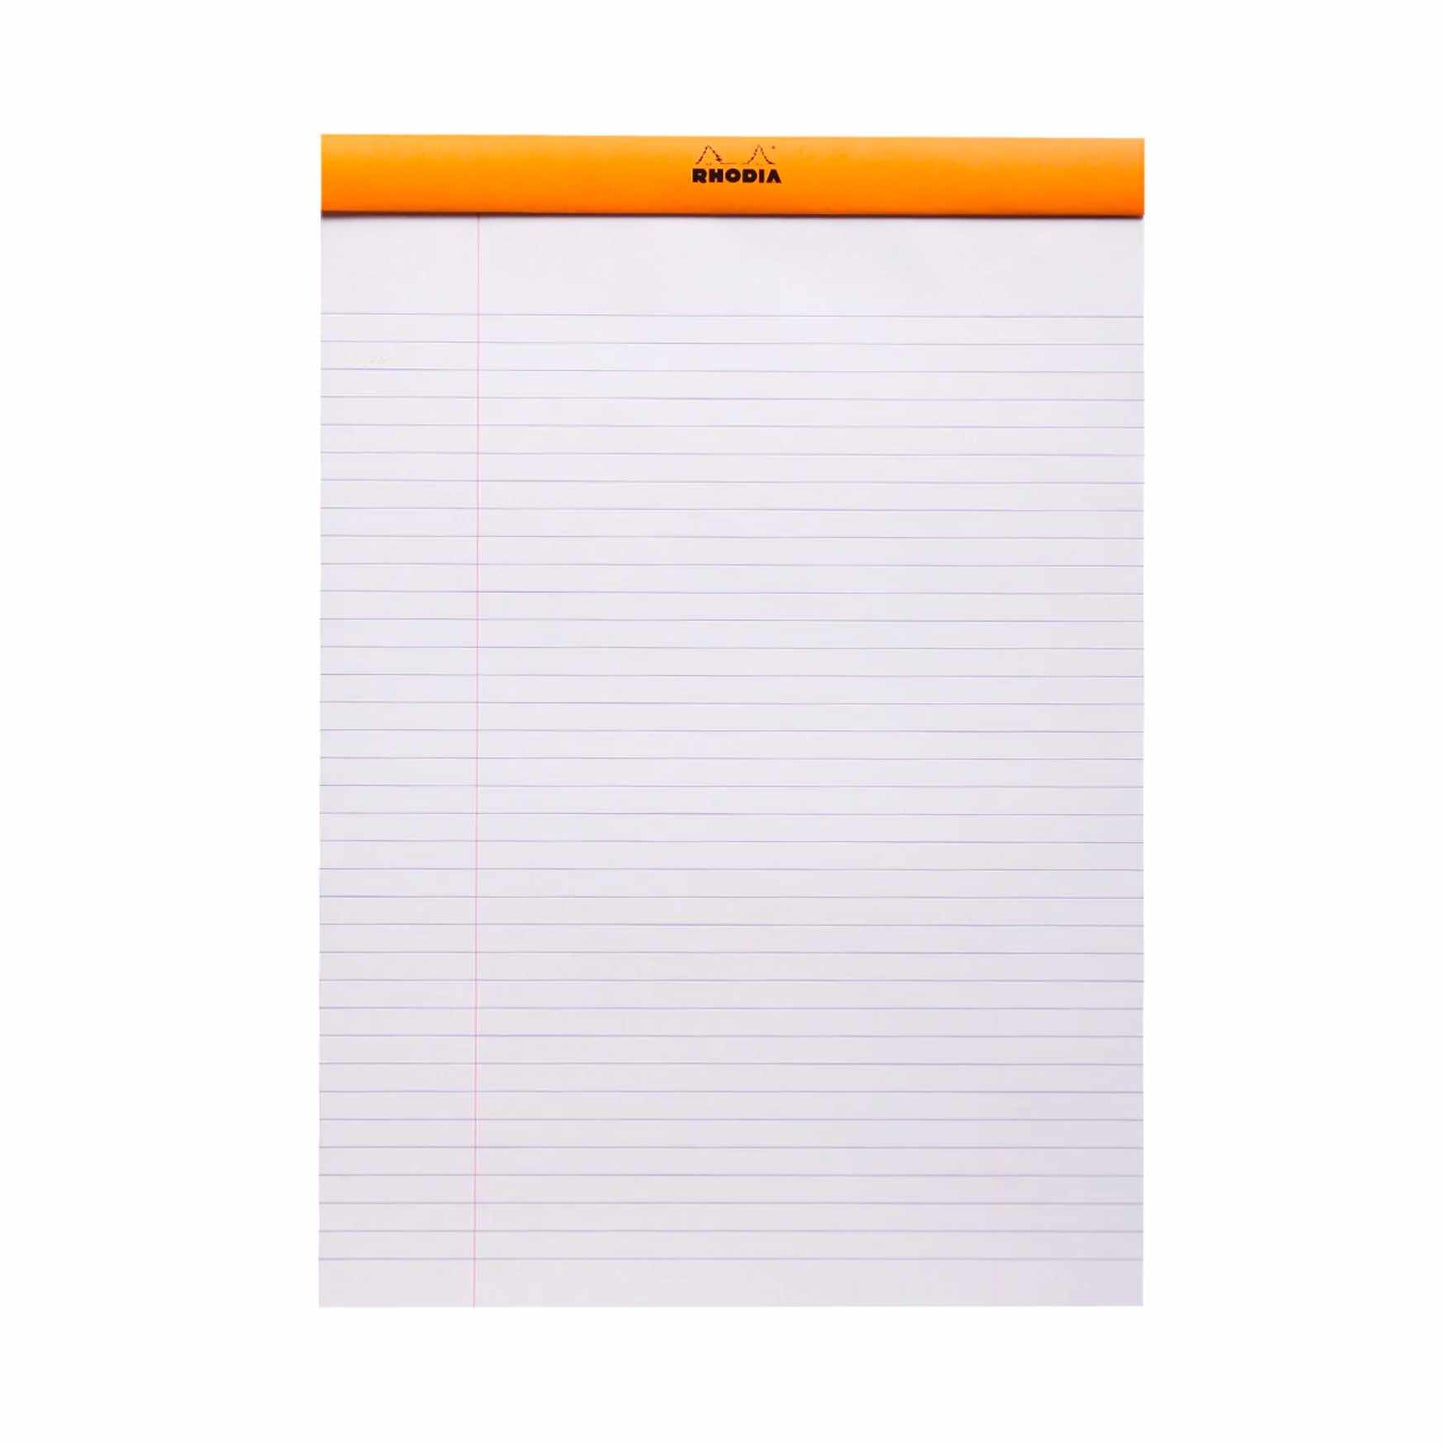 Rhodia - A4 Lined Pad